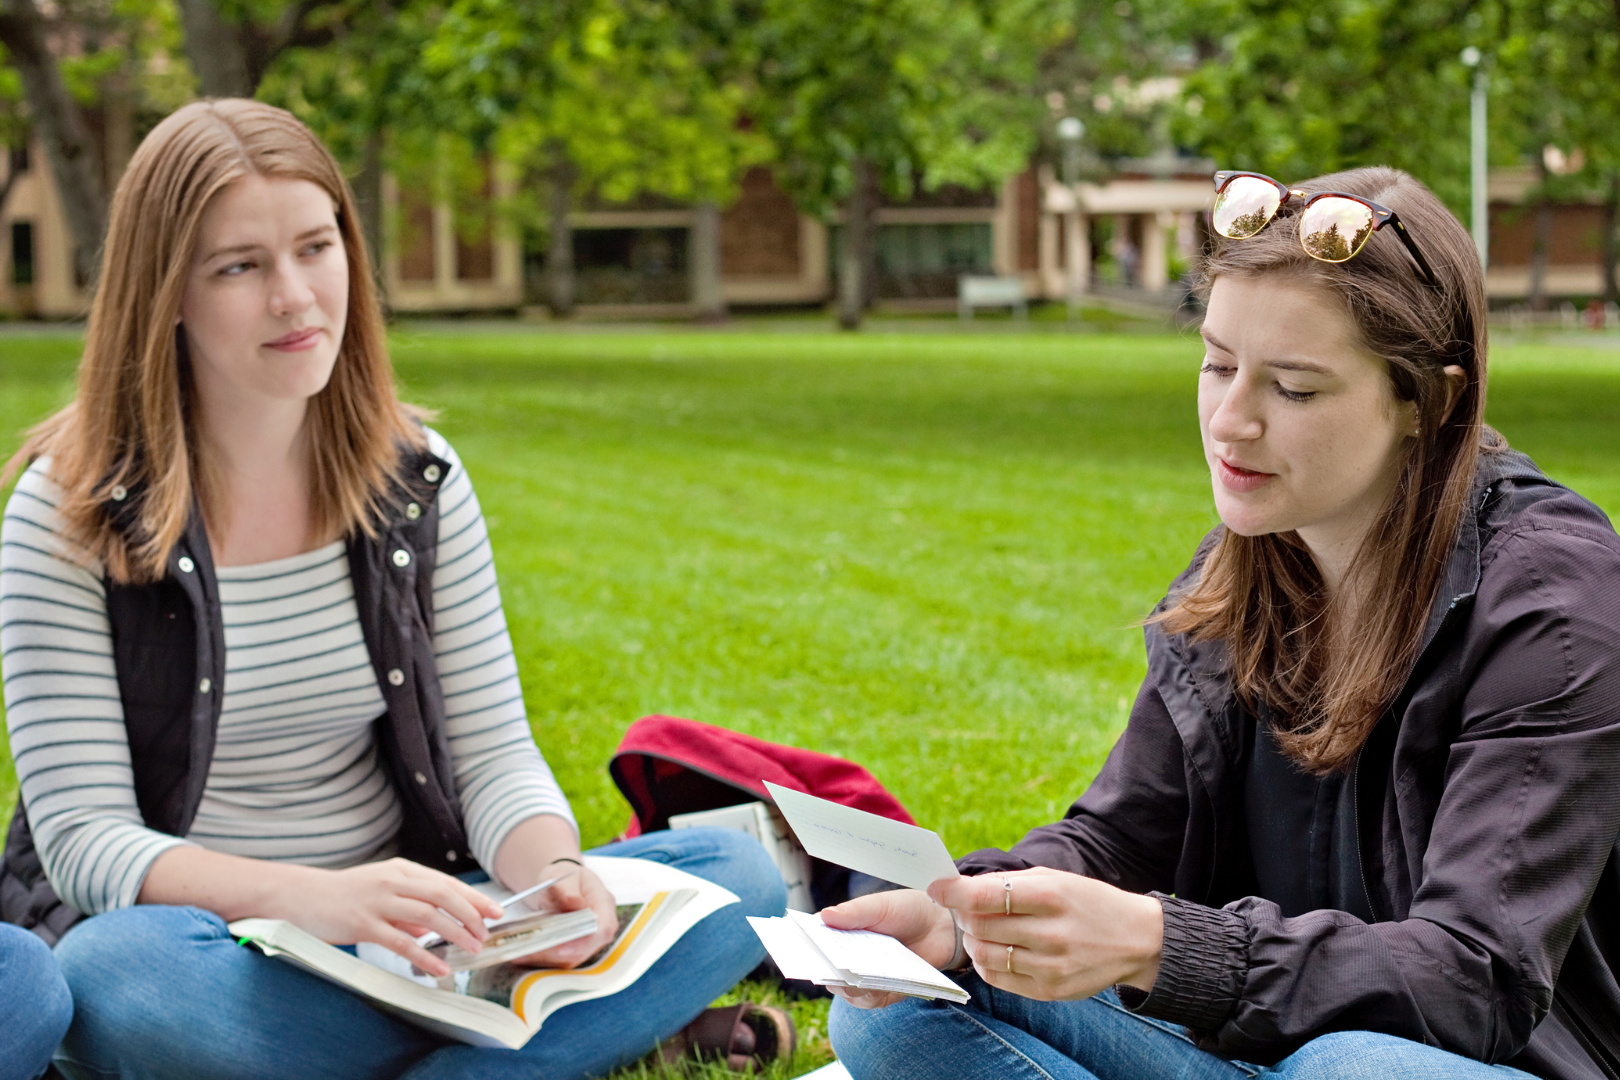 Two women sit outside. One women is reading from a card and the other is looking at her and smiling